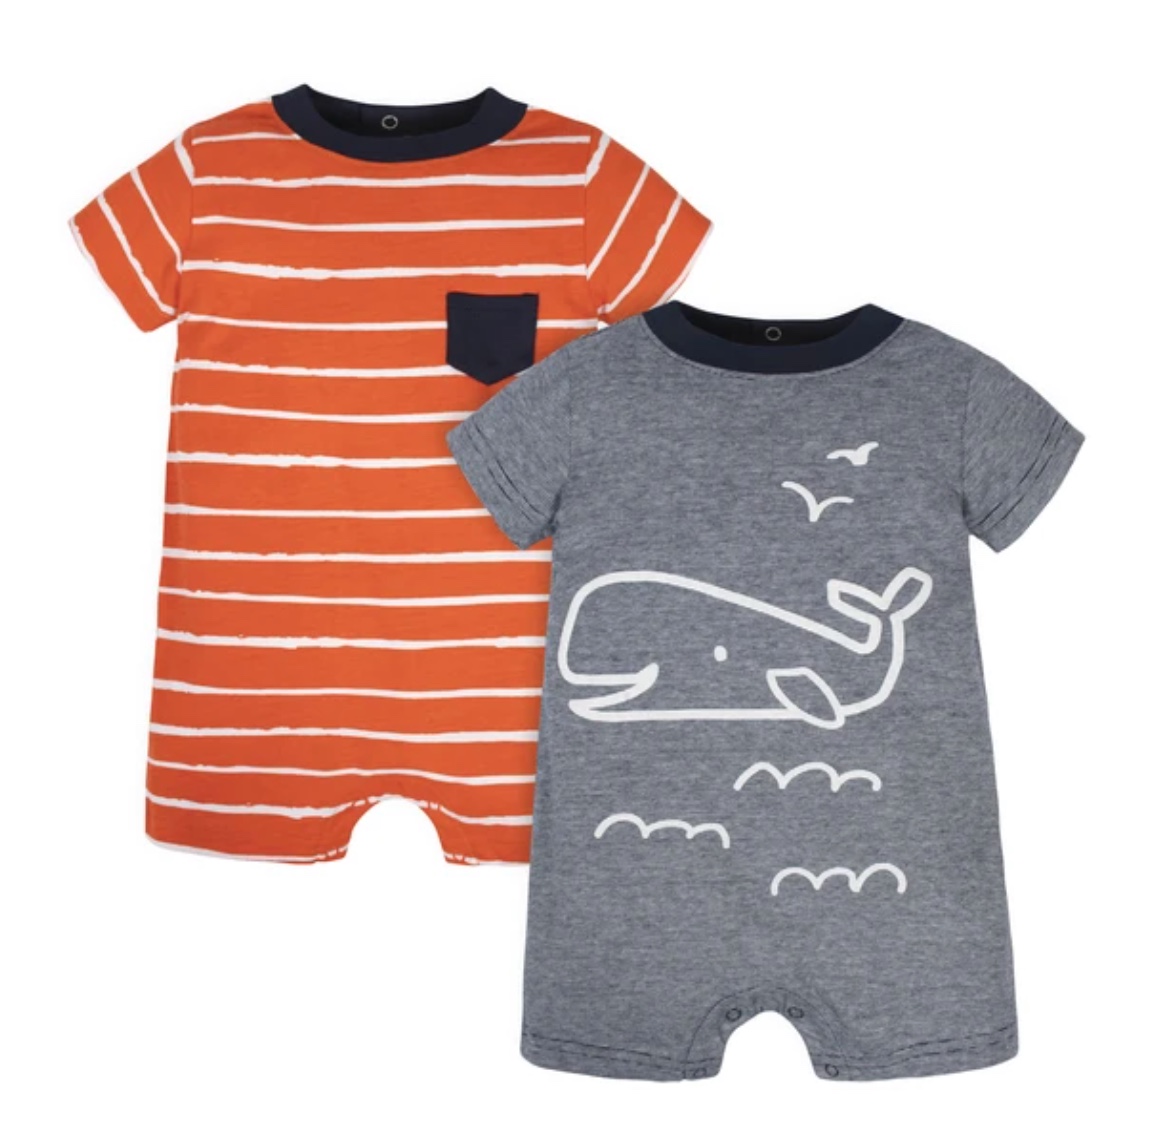 Let Gerber's Childrenswear Line Help You Prepare a Great Baby Shower Gift | So many great baby shower gift options!